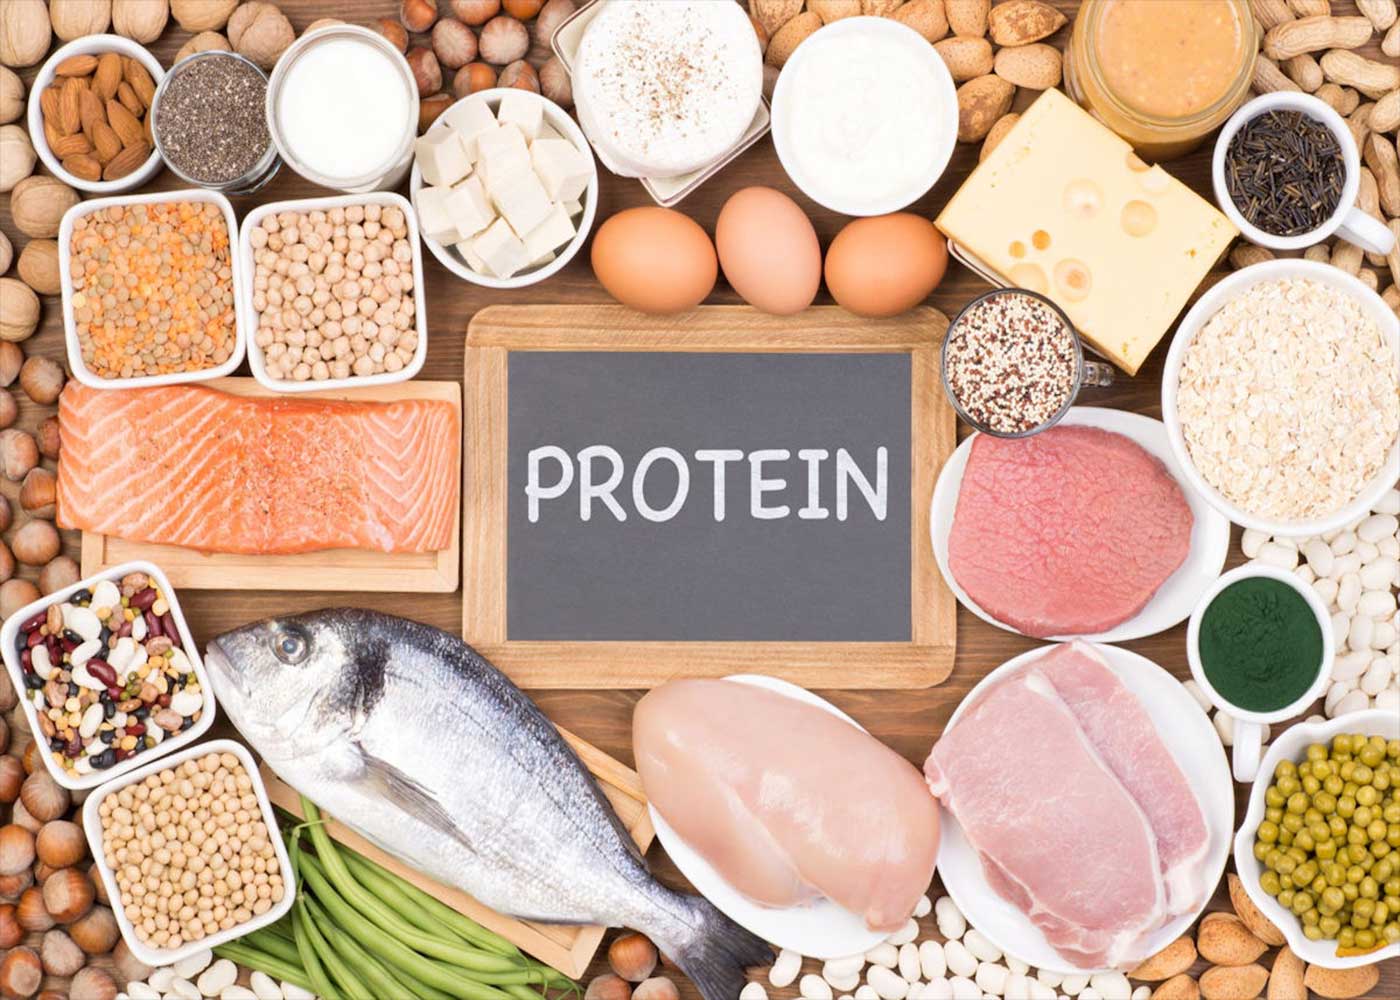 Energy Meal Plans: Lean Protein Benefits